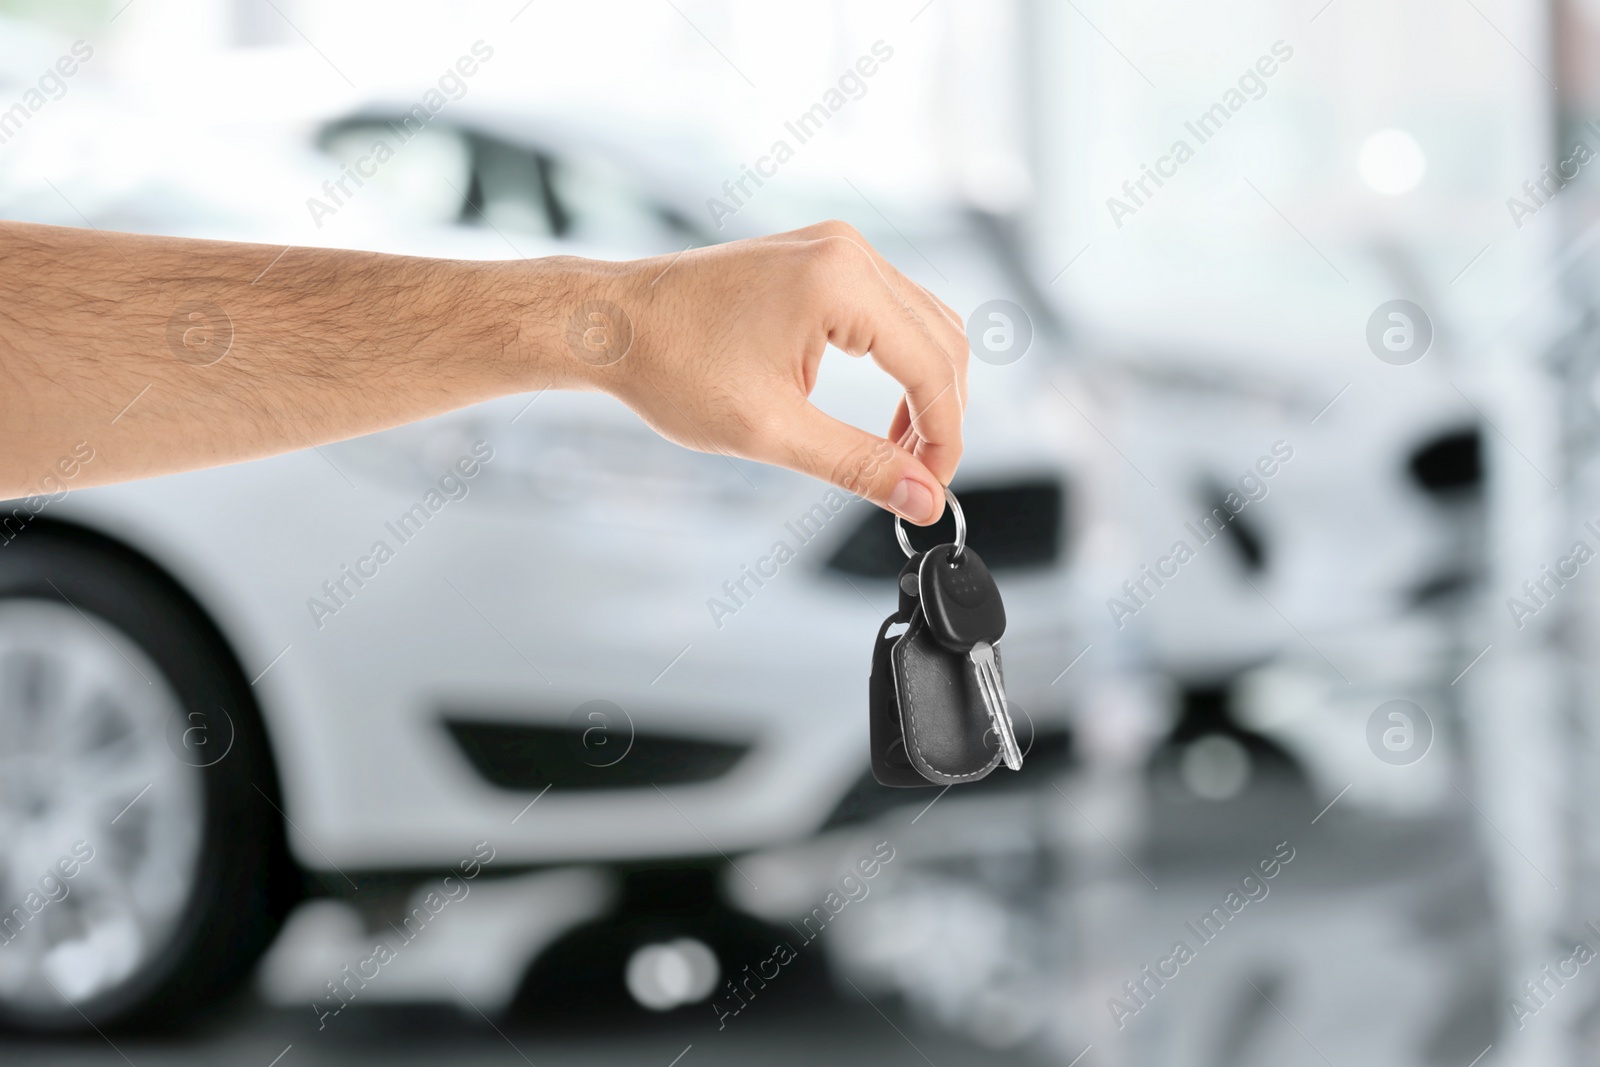 Image of Car buying. Man holding key against blurred automobiles, closeup